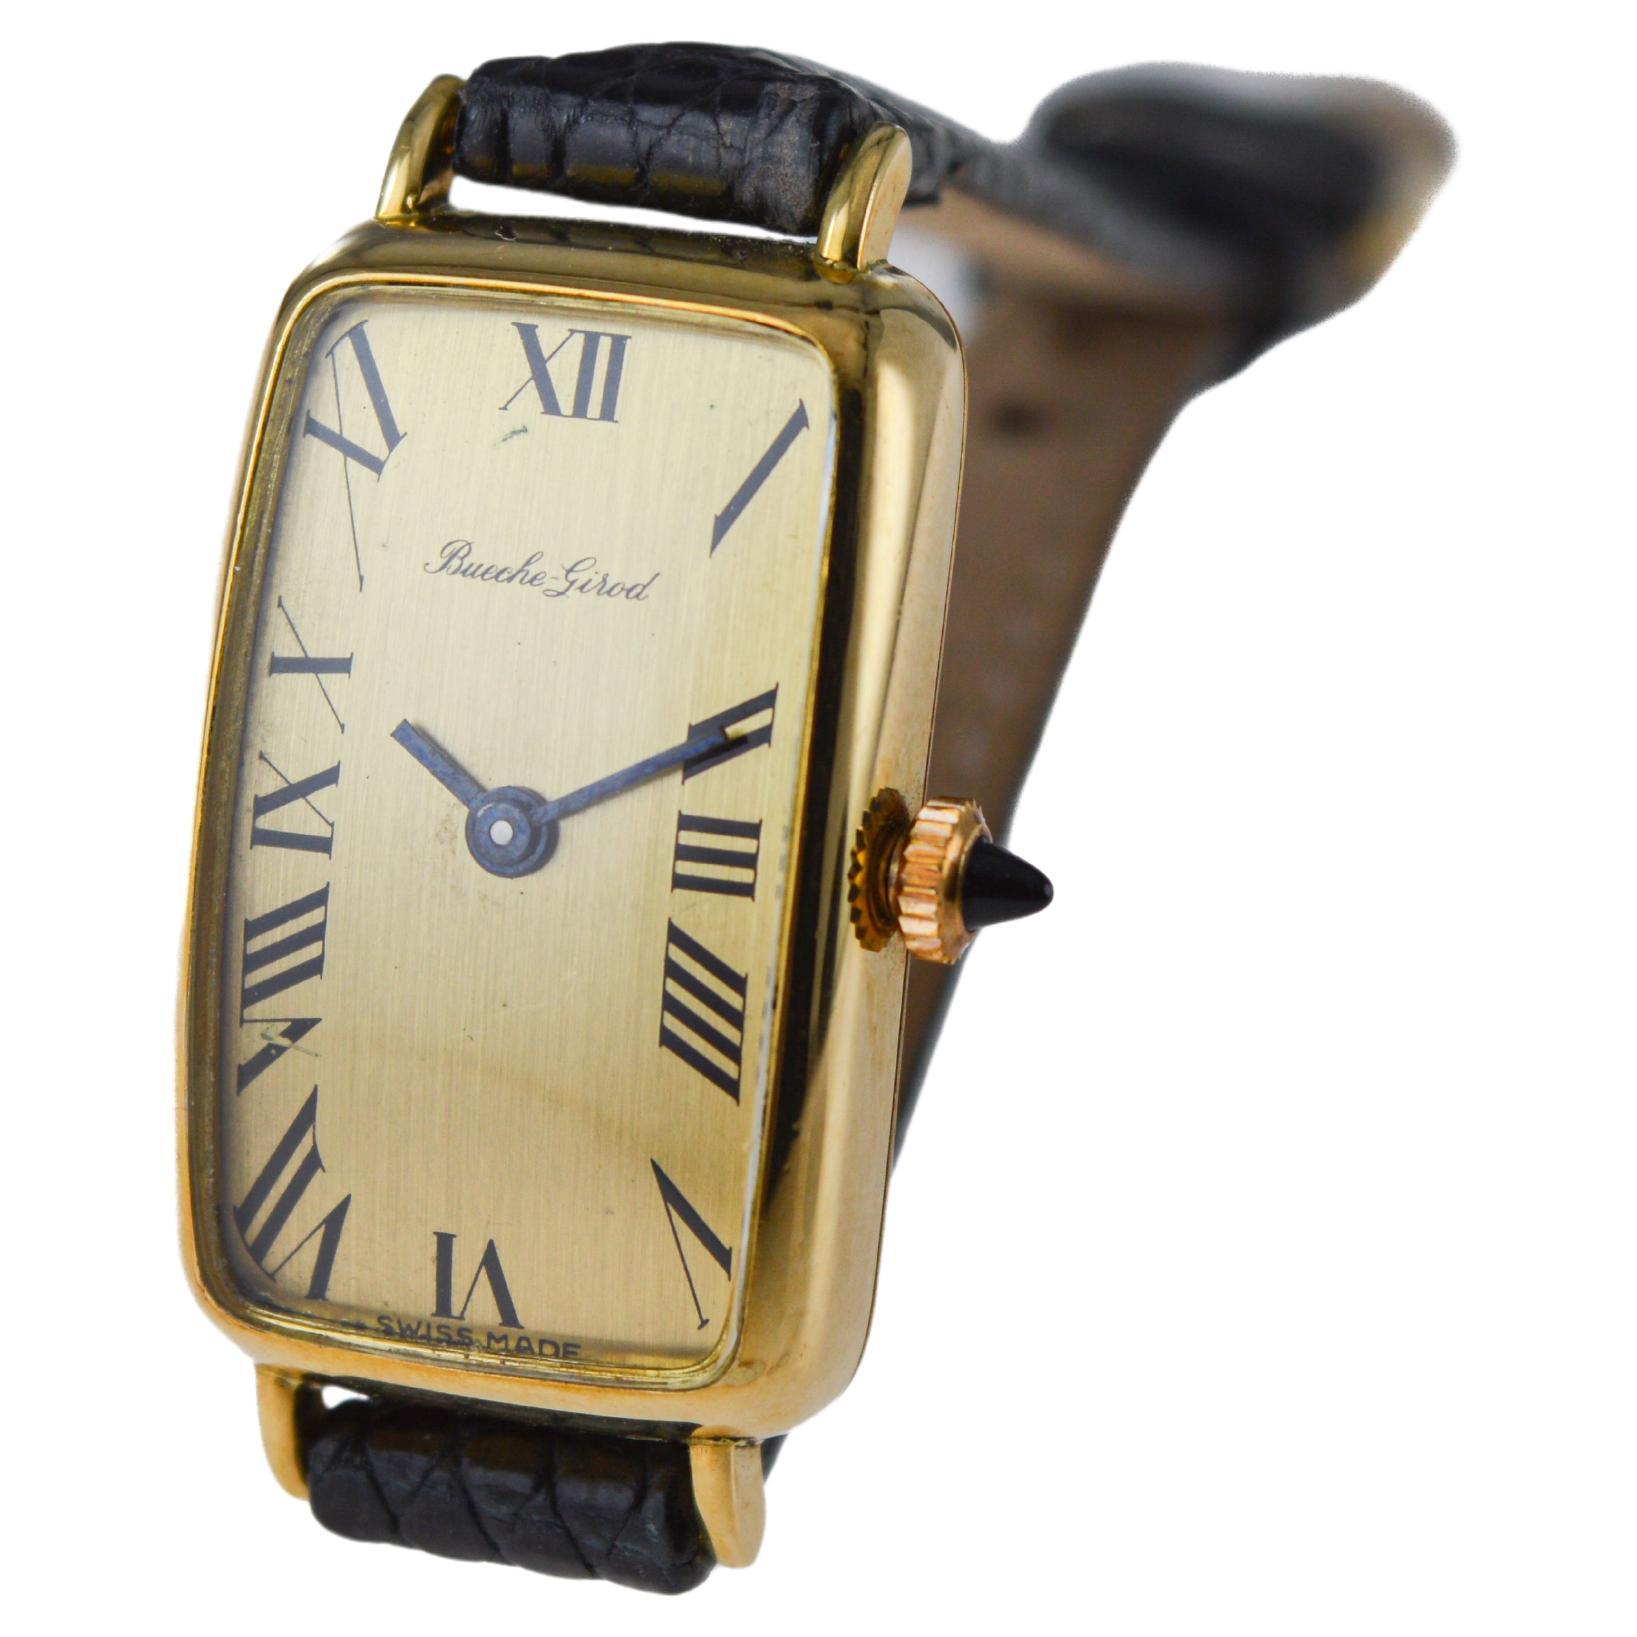 Bueche Girod 18 Karat, Yellow Midcentury Watch Originally Owned by Jerry Lewis For Sale 2